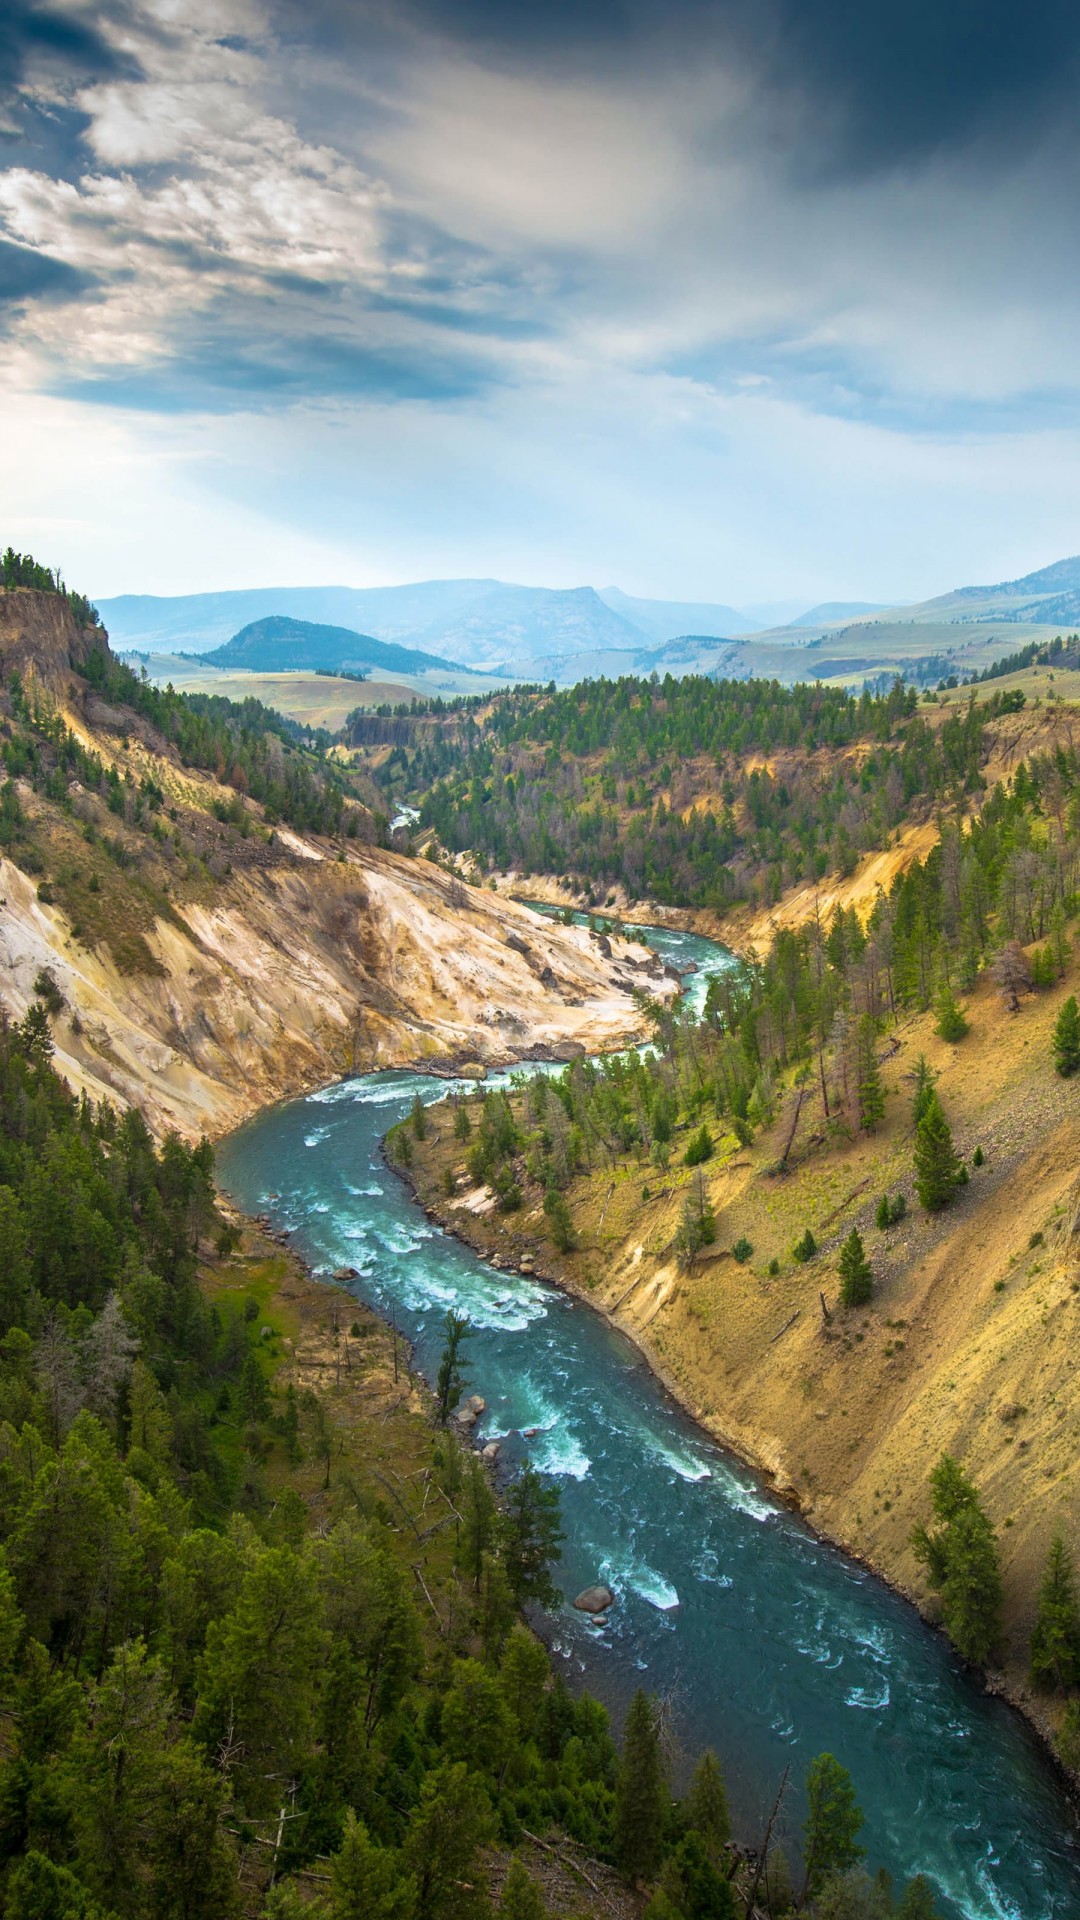 The River, Grand Canyon of Yellowstone National Park, USA Wallpaper for SAMSUNG Galaxy Note 3